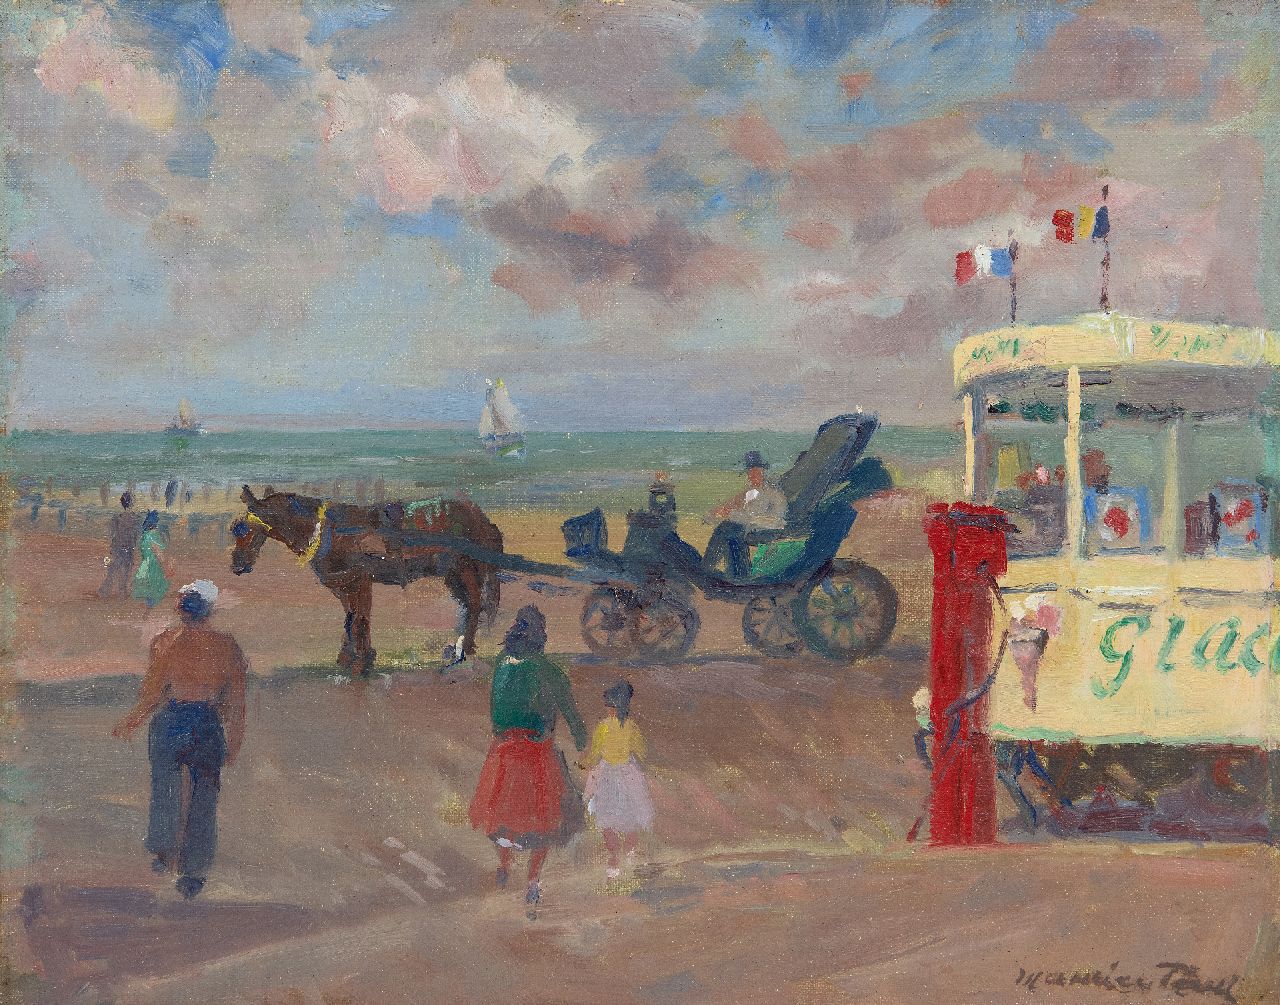 Paul M.  | Maurice Paul | Paintings offered for sale | Selling ice cream at the beach, oil on canvas laid down on board 28.2 x 36.1 cm, signed l.r.